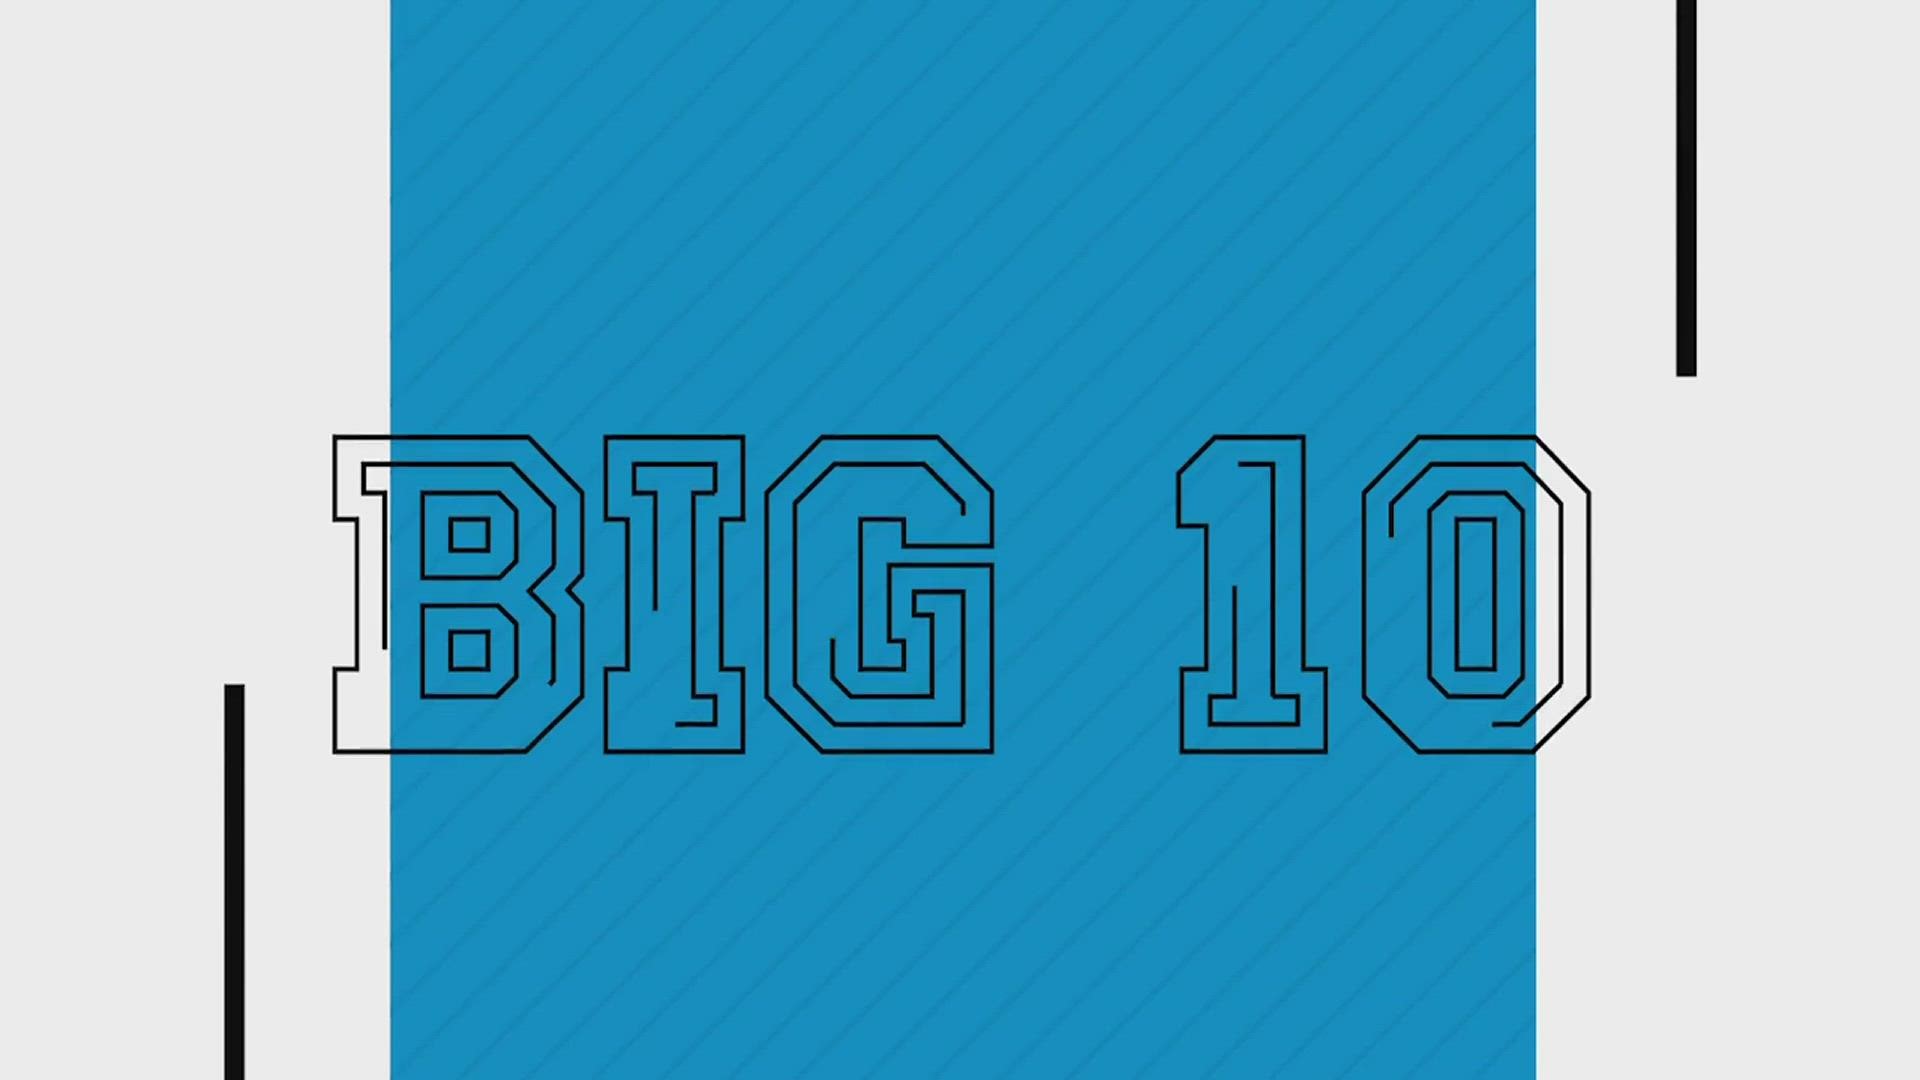 Locked On Big 10 podcast host Ben Stevens and Daniel House of gophersguru.com talk about the biggest games on this weekend's Big 10 football schedule.